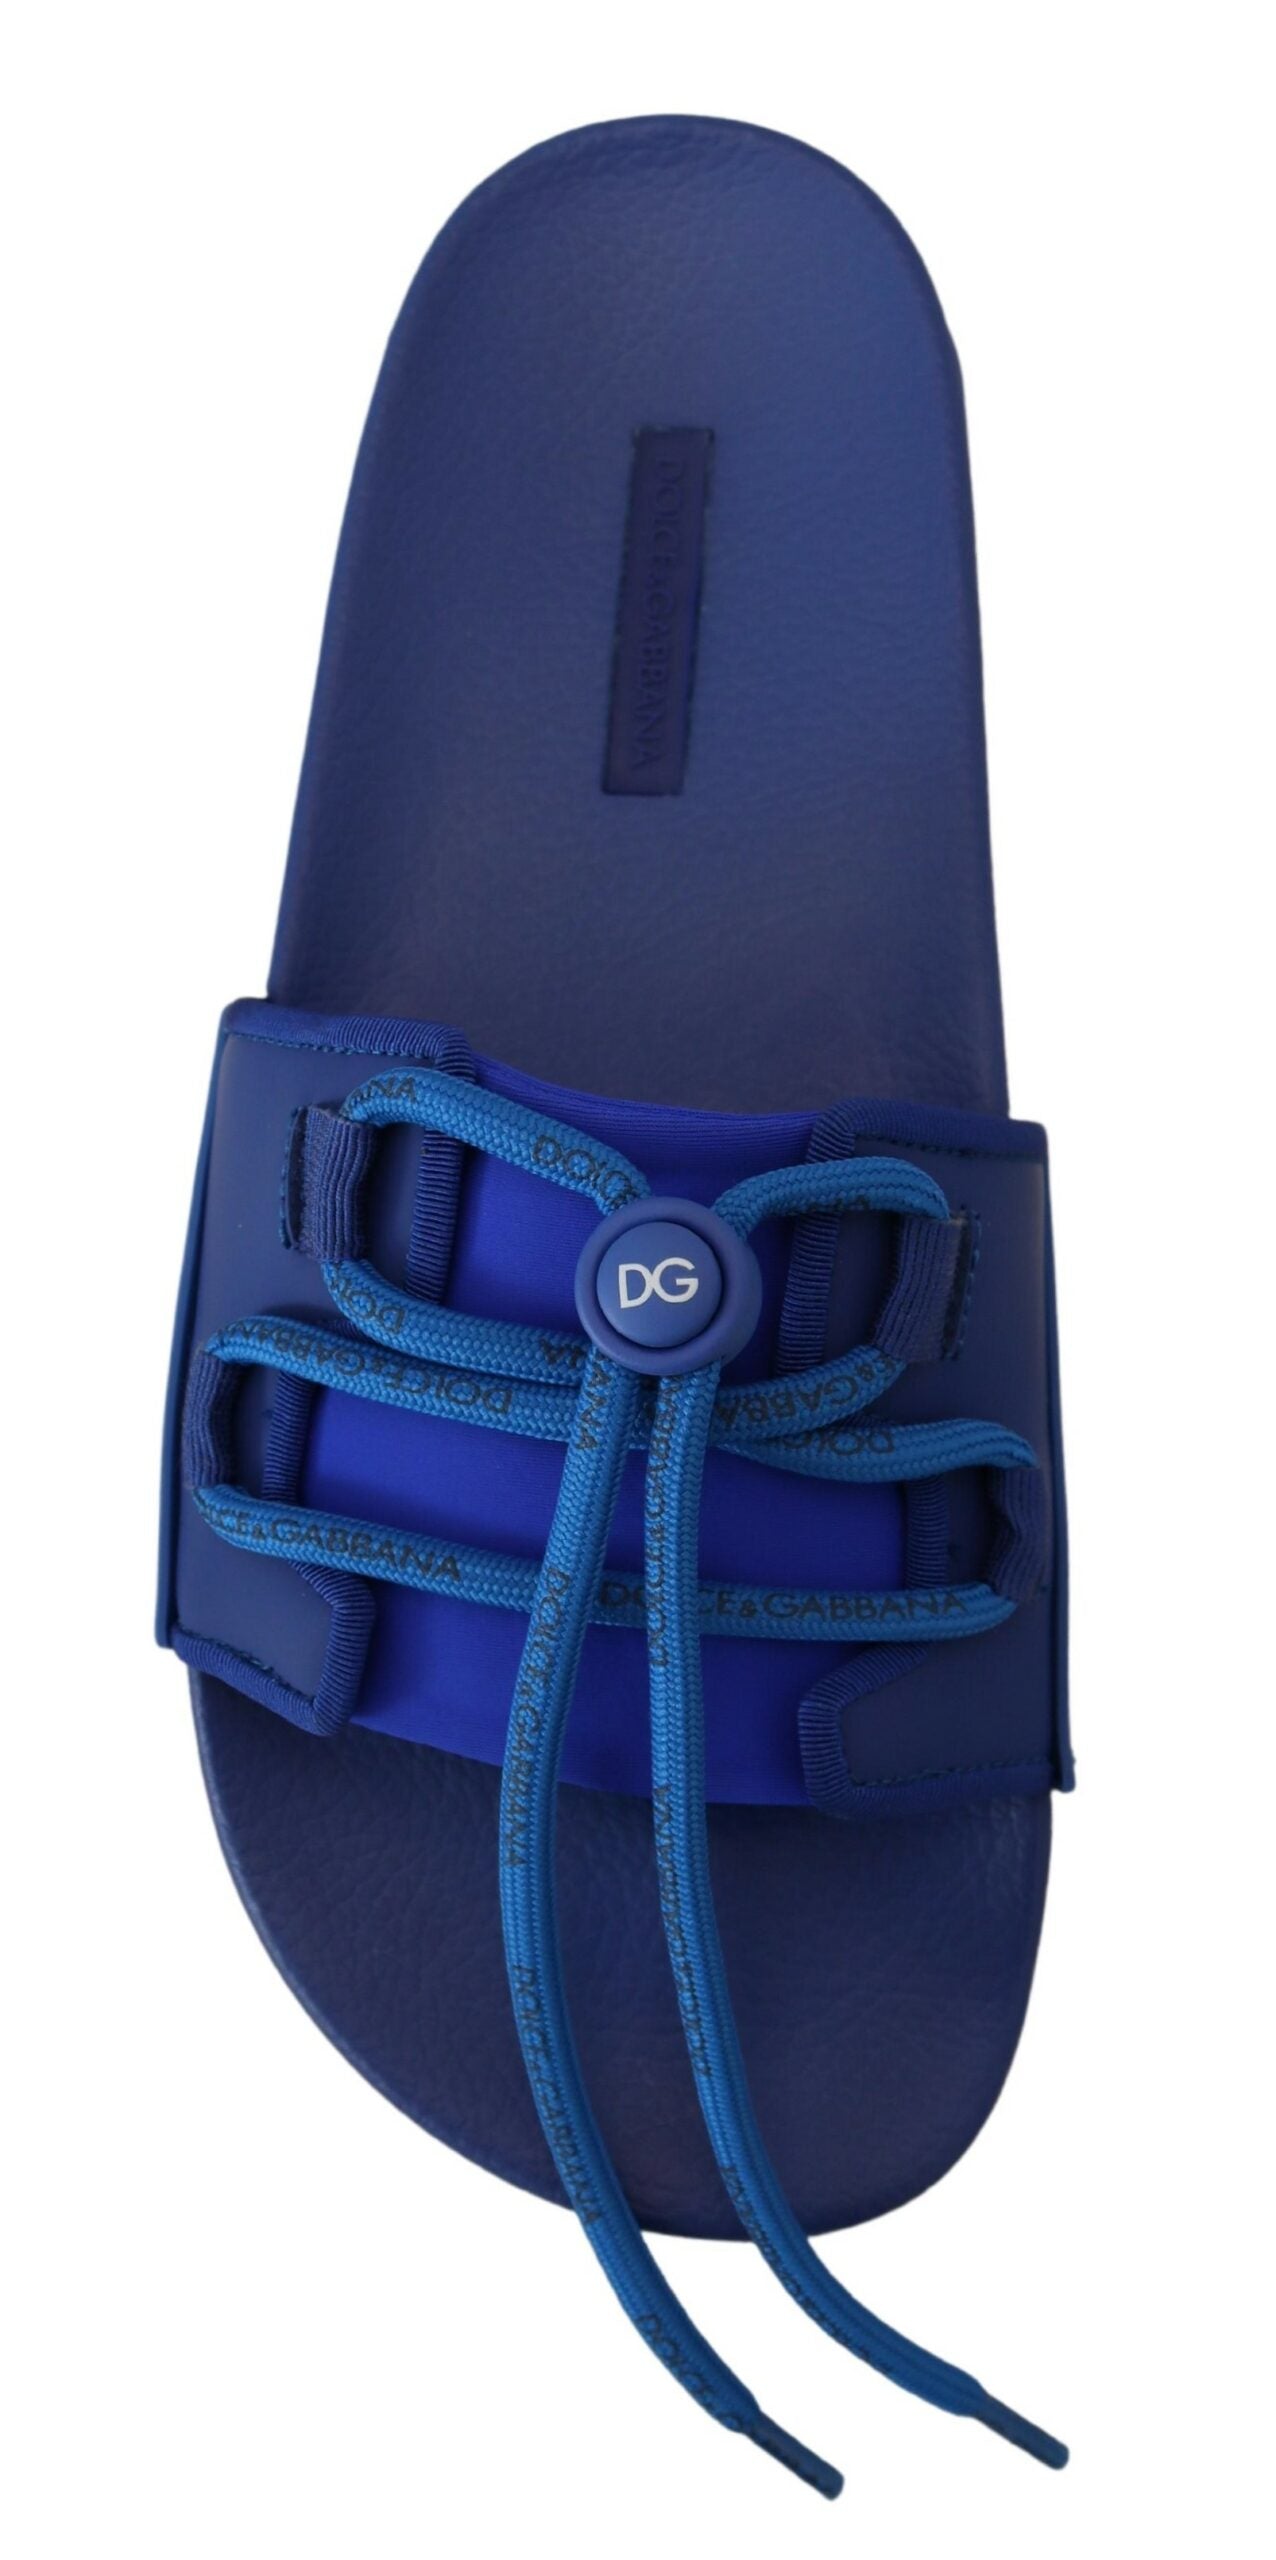 Dolce & Gabbana Men's Blue Stretch Rubber Sandals Slides Slip On Shoes - Designed by Dolce & Gabbana Available to Buy at a Discounted Price on Moon Behind The Hill Online Designer Discount St